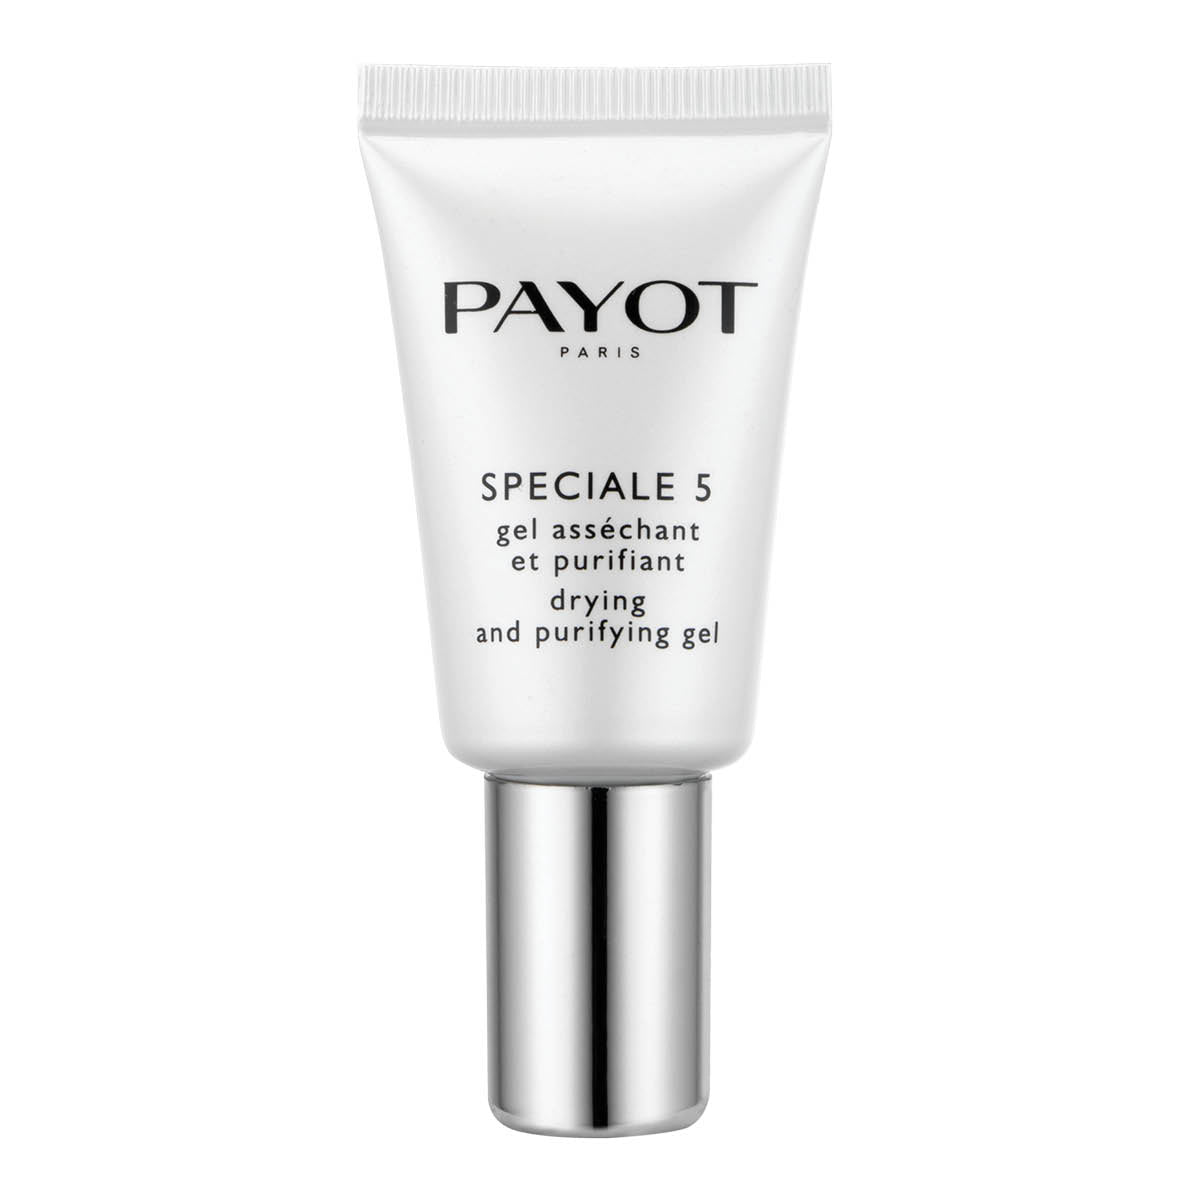 Payot Speciale 5 15ml